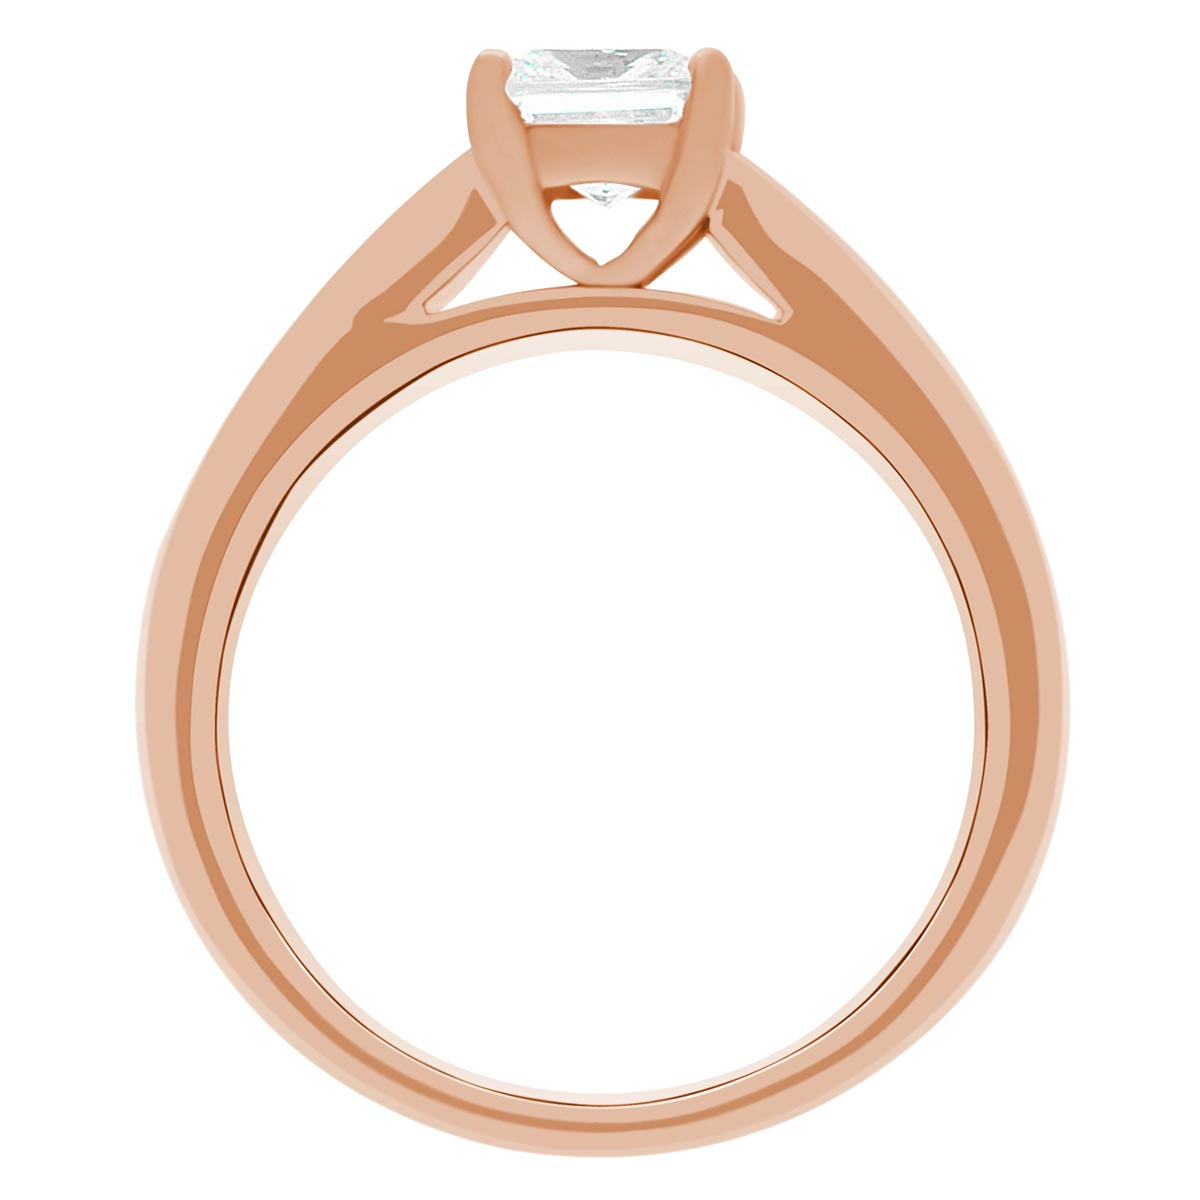 Fancy Cut Diamond Ring made from rose gold and standing upright